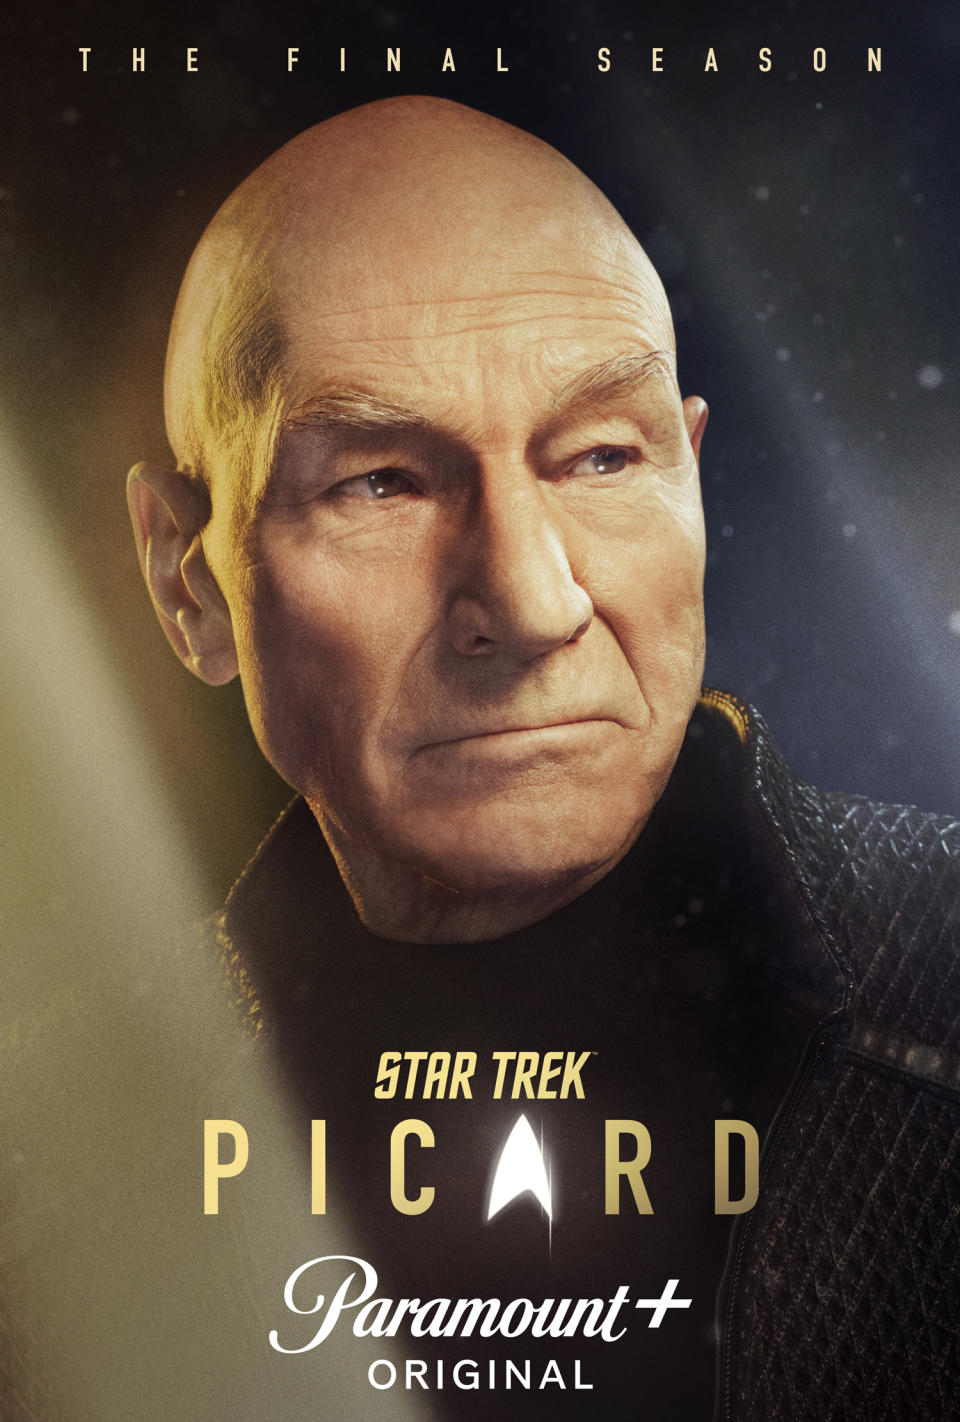 A promotional headshot of Sir Patrick Stewart as Captain Jean Luc Picard.